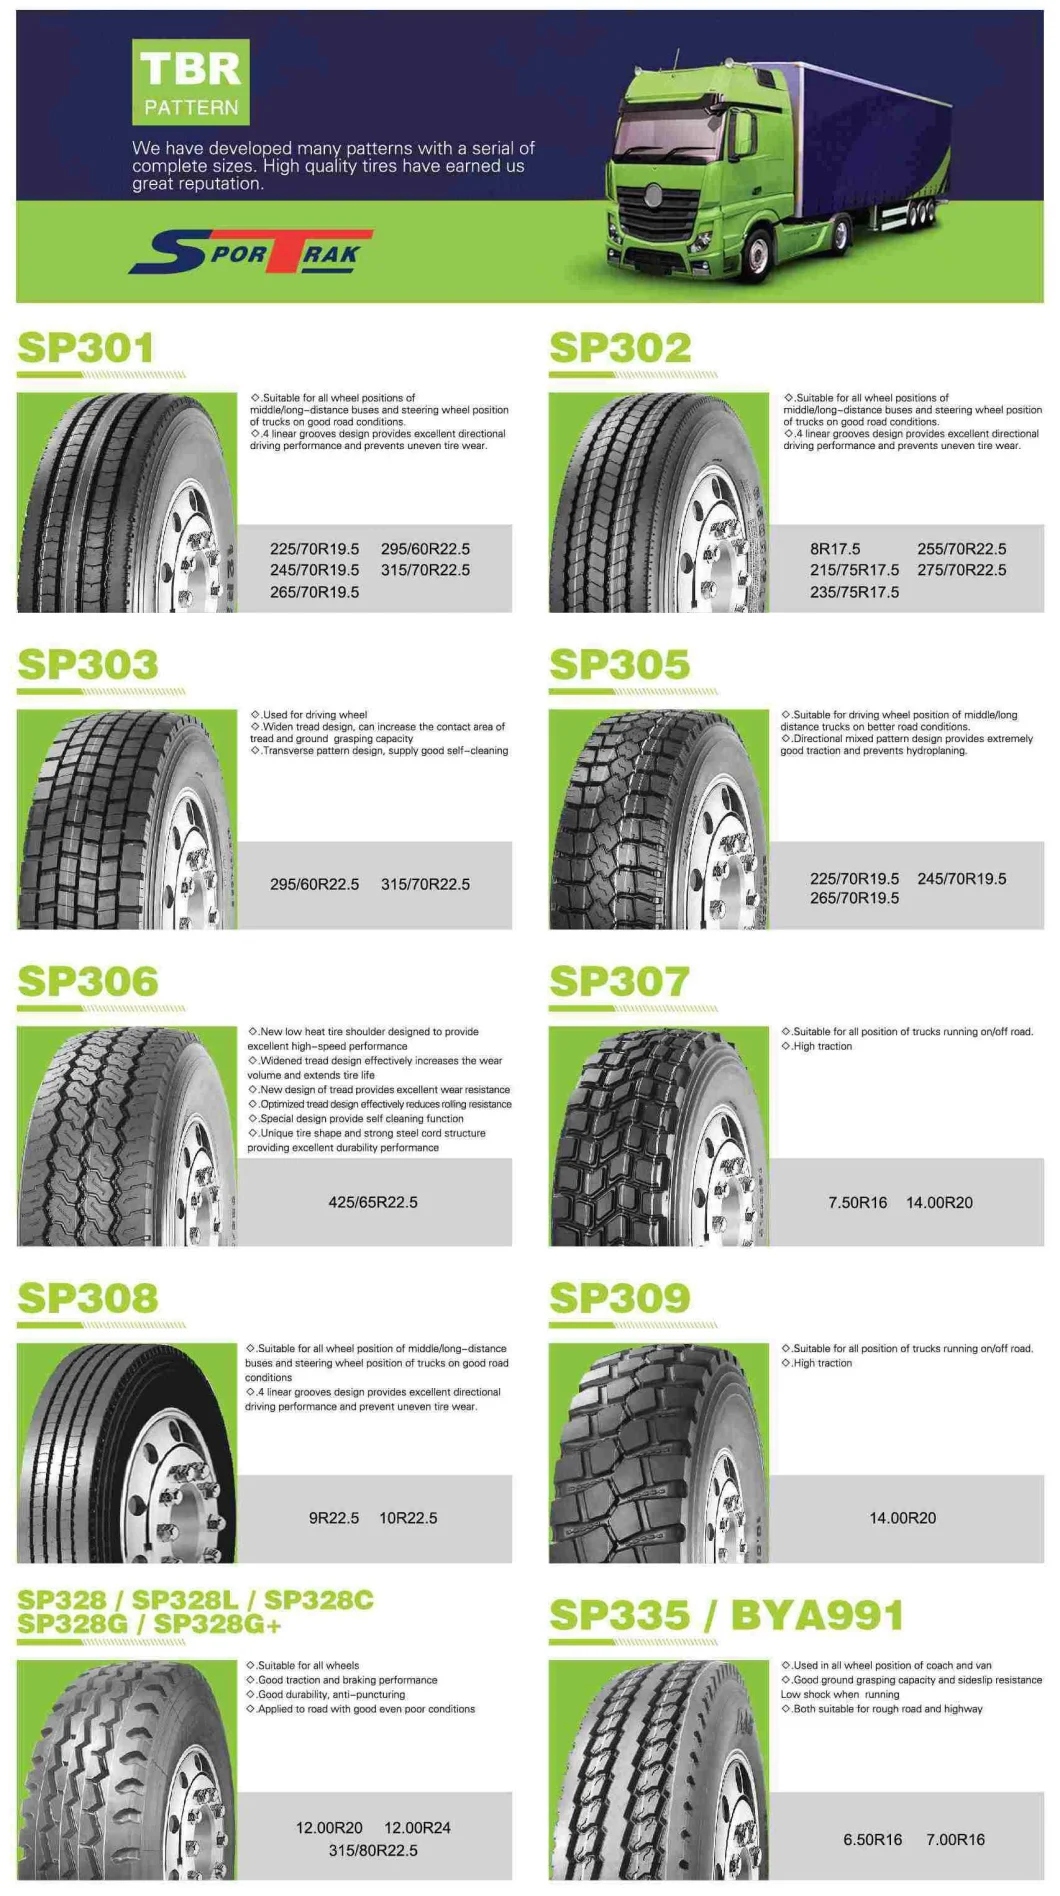 Heavy Duty Truck Tire, Radial Truck Tire (295/80R22.5) for Malaysia